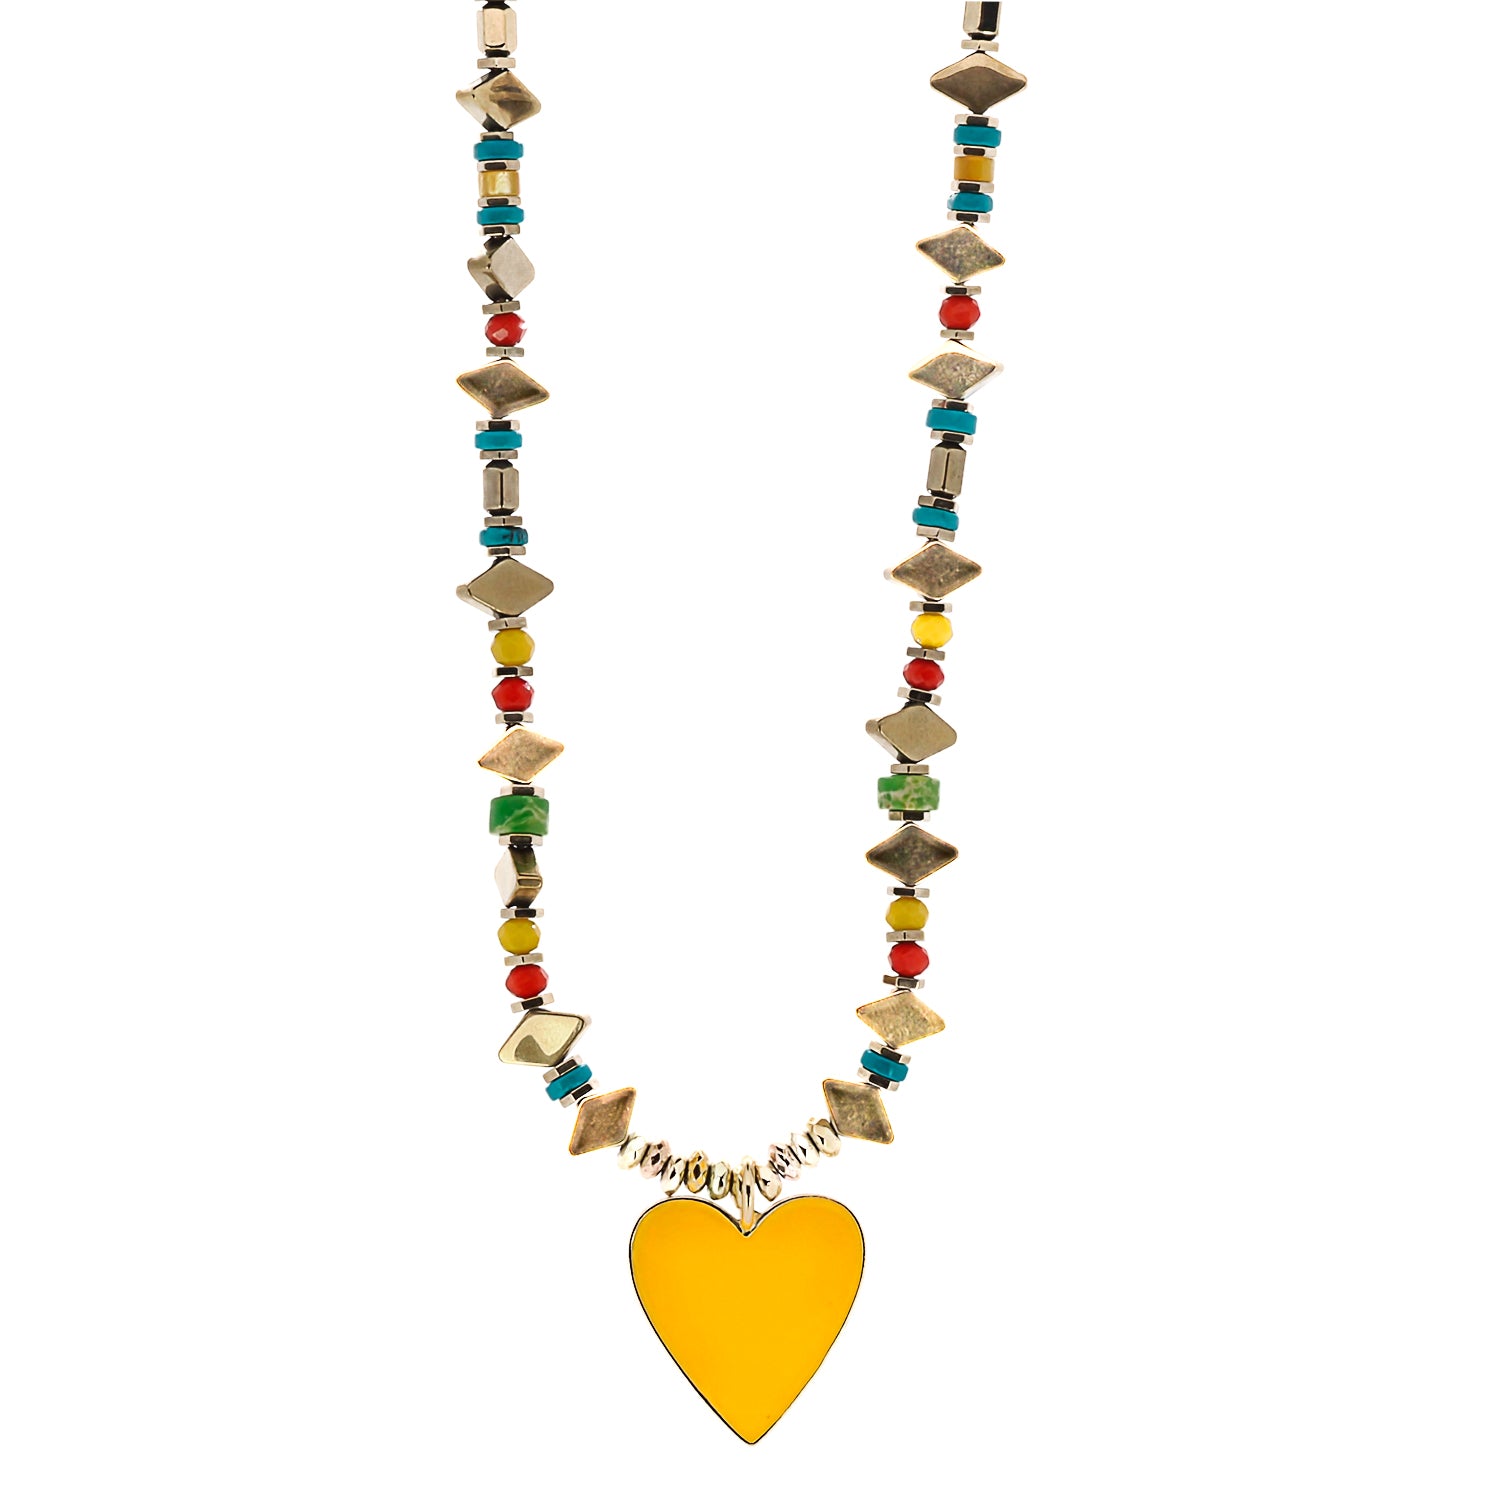 The Joyful Heartbeat Necklace is the perfect accessory to add a pop of color and cheer to any outfit. 